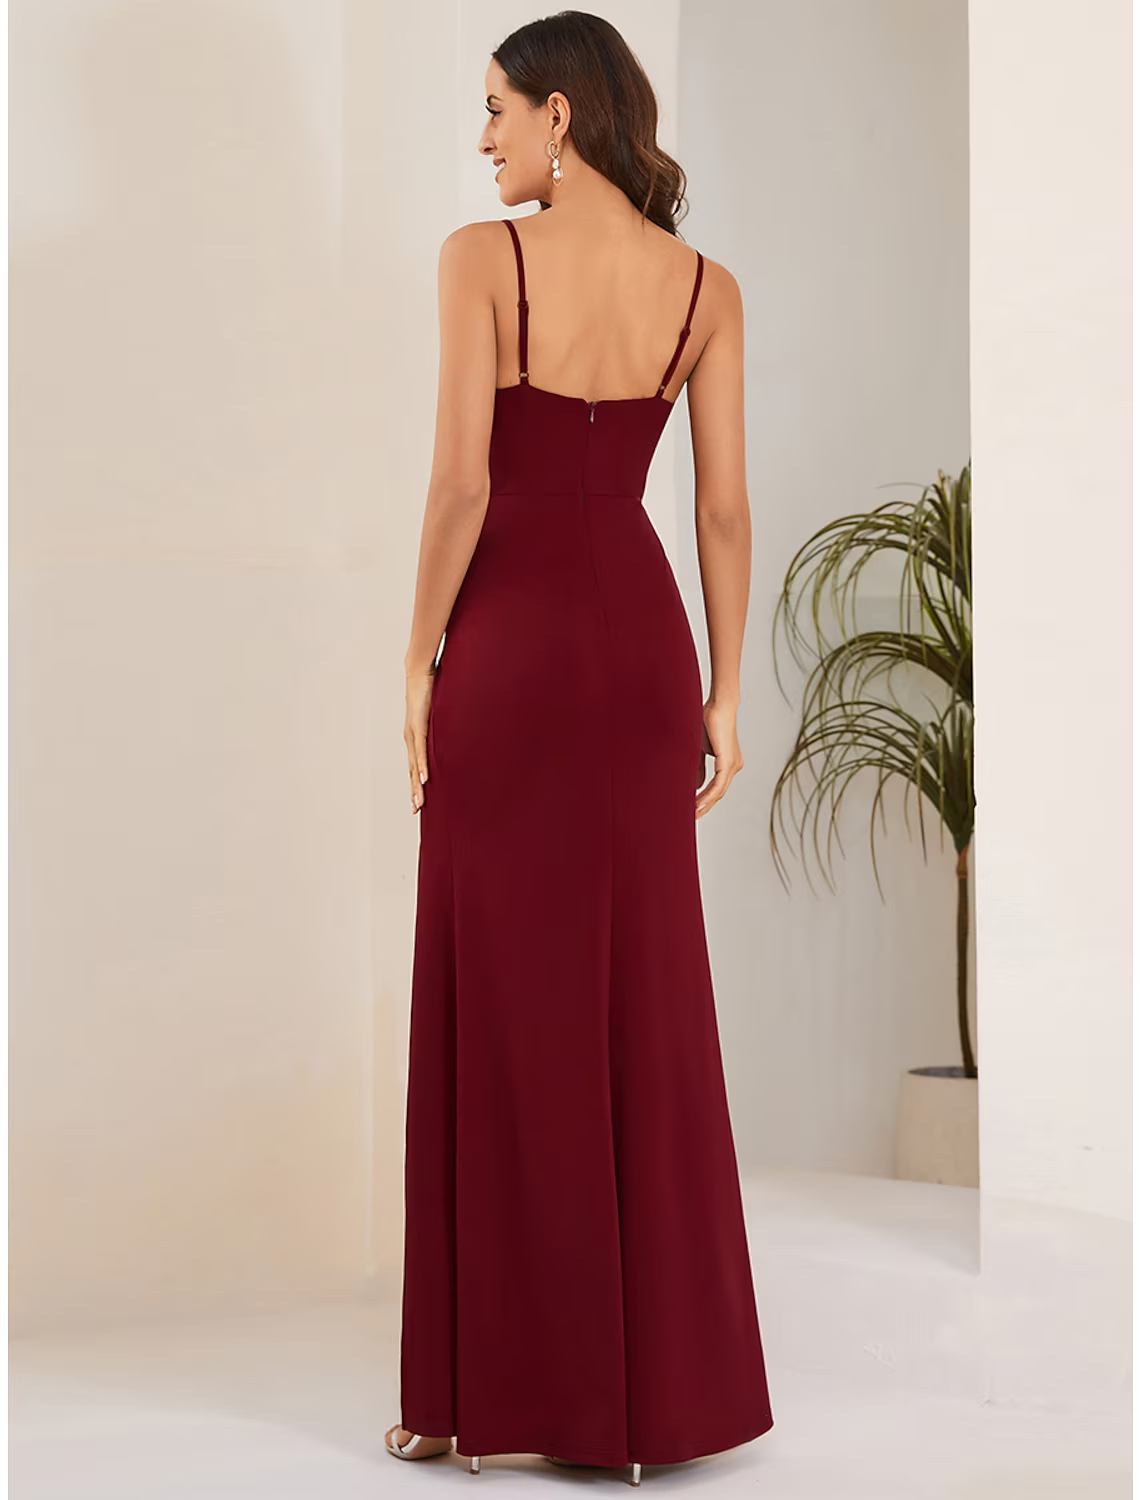 Wedding Guest Dresses Sexy Dress Formal Floor Length Sleeveless Strap Stretch Fabric with Slit